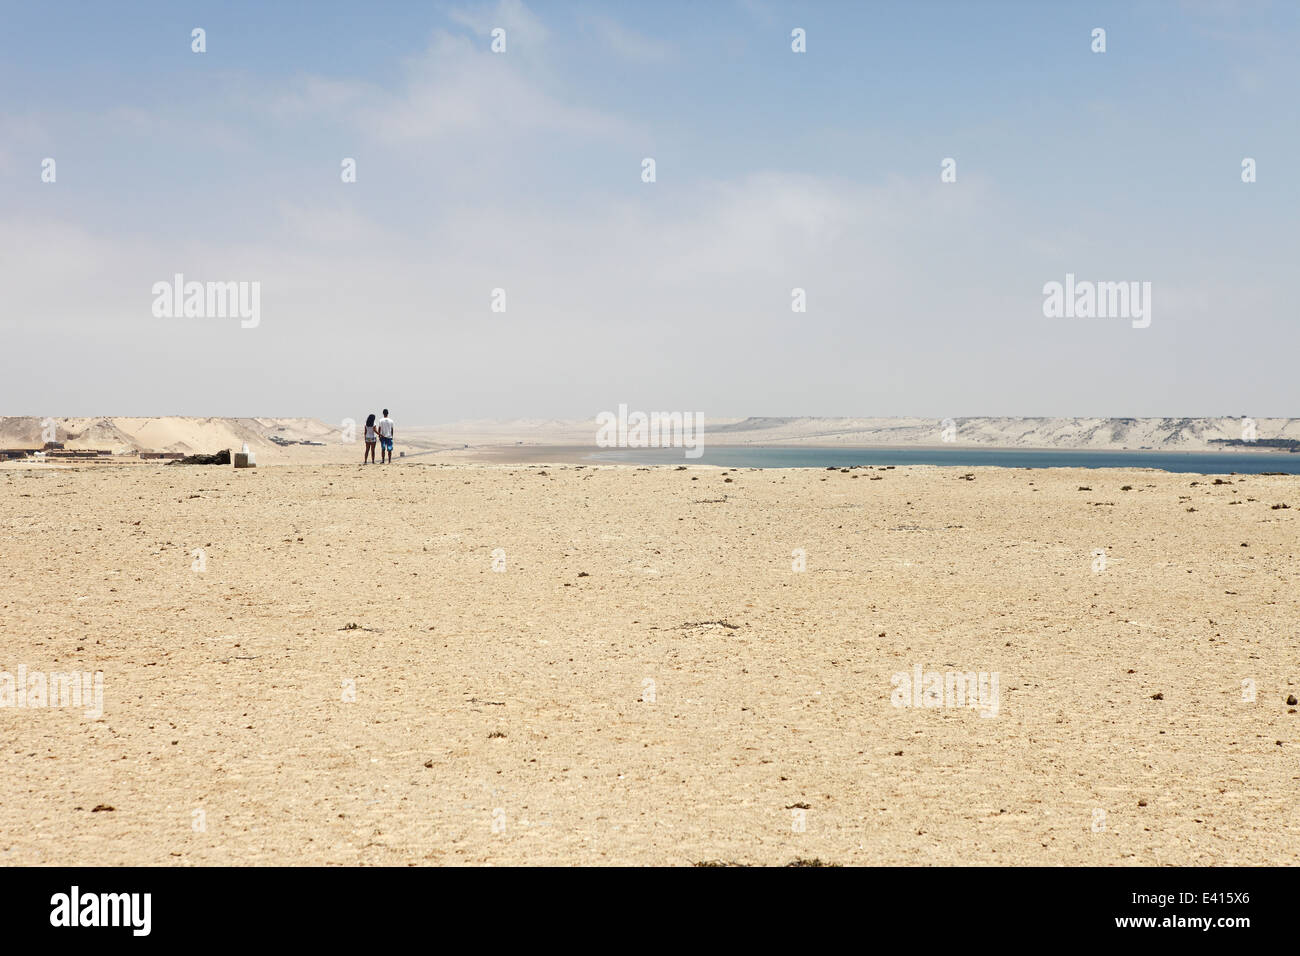 A couple enjoy the view North of the lagoon from above Spirit Camp accommodation in Dakhla, Western Sahara, Morocco Stock Photo